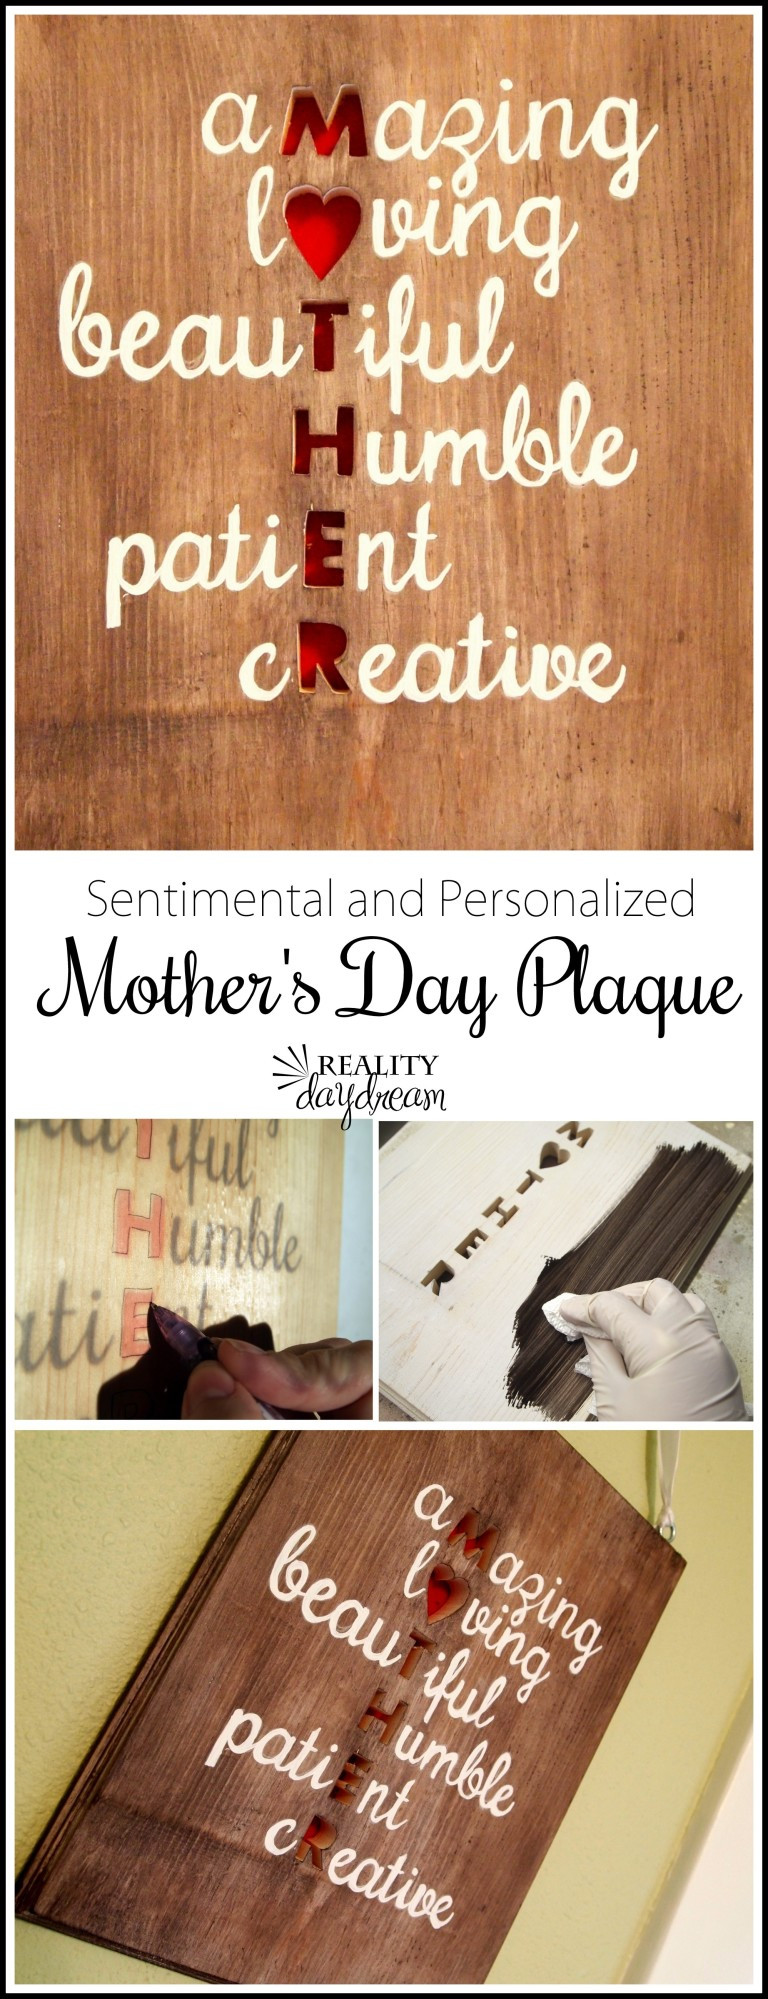 Last Minute DIY Mother'S Day Gifts
 15 Wonderful Last Minute DIY Mother s Day Gift Ideas In